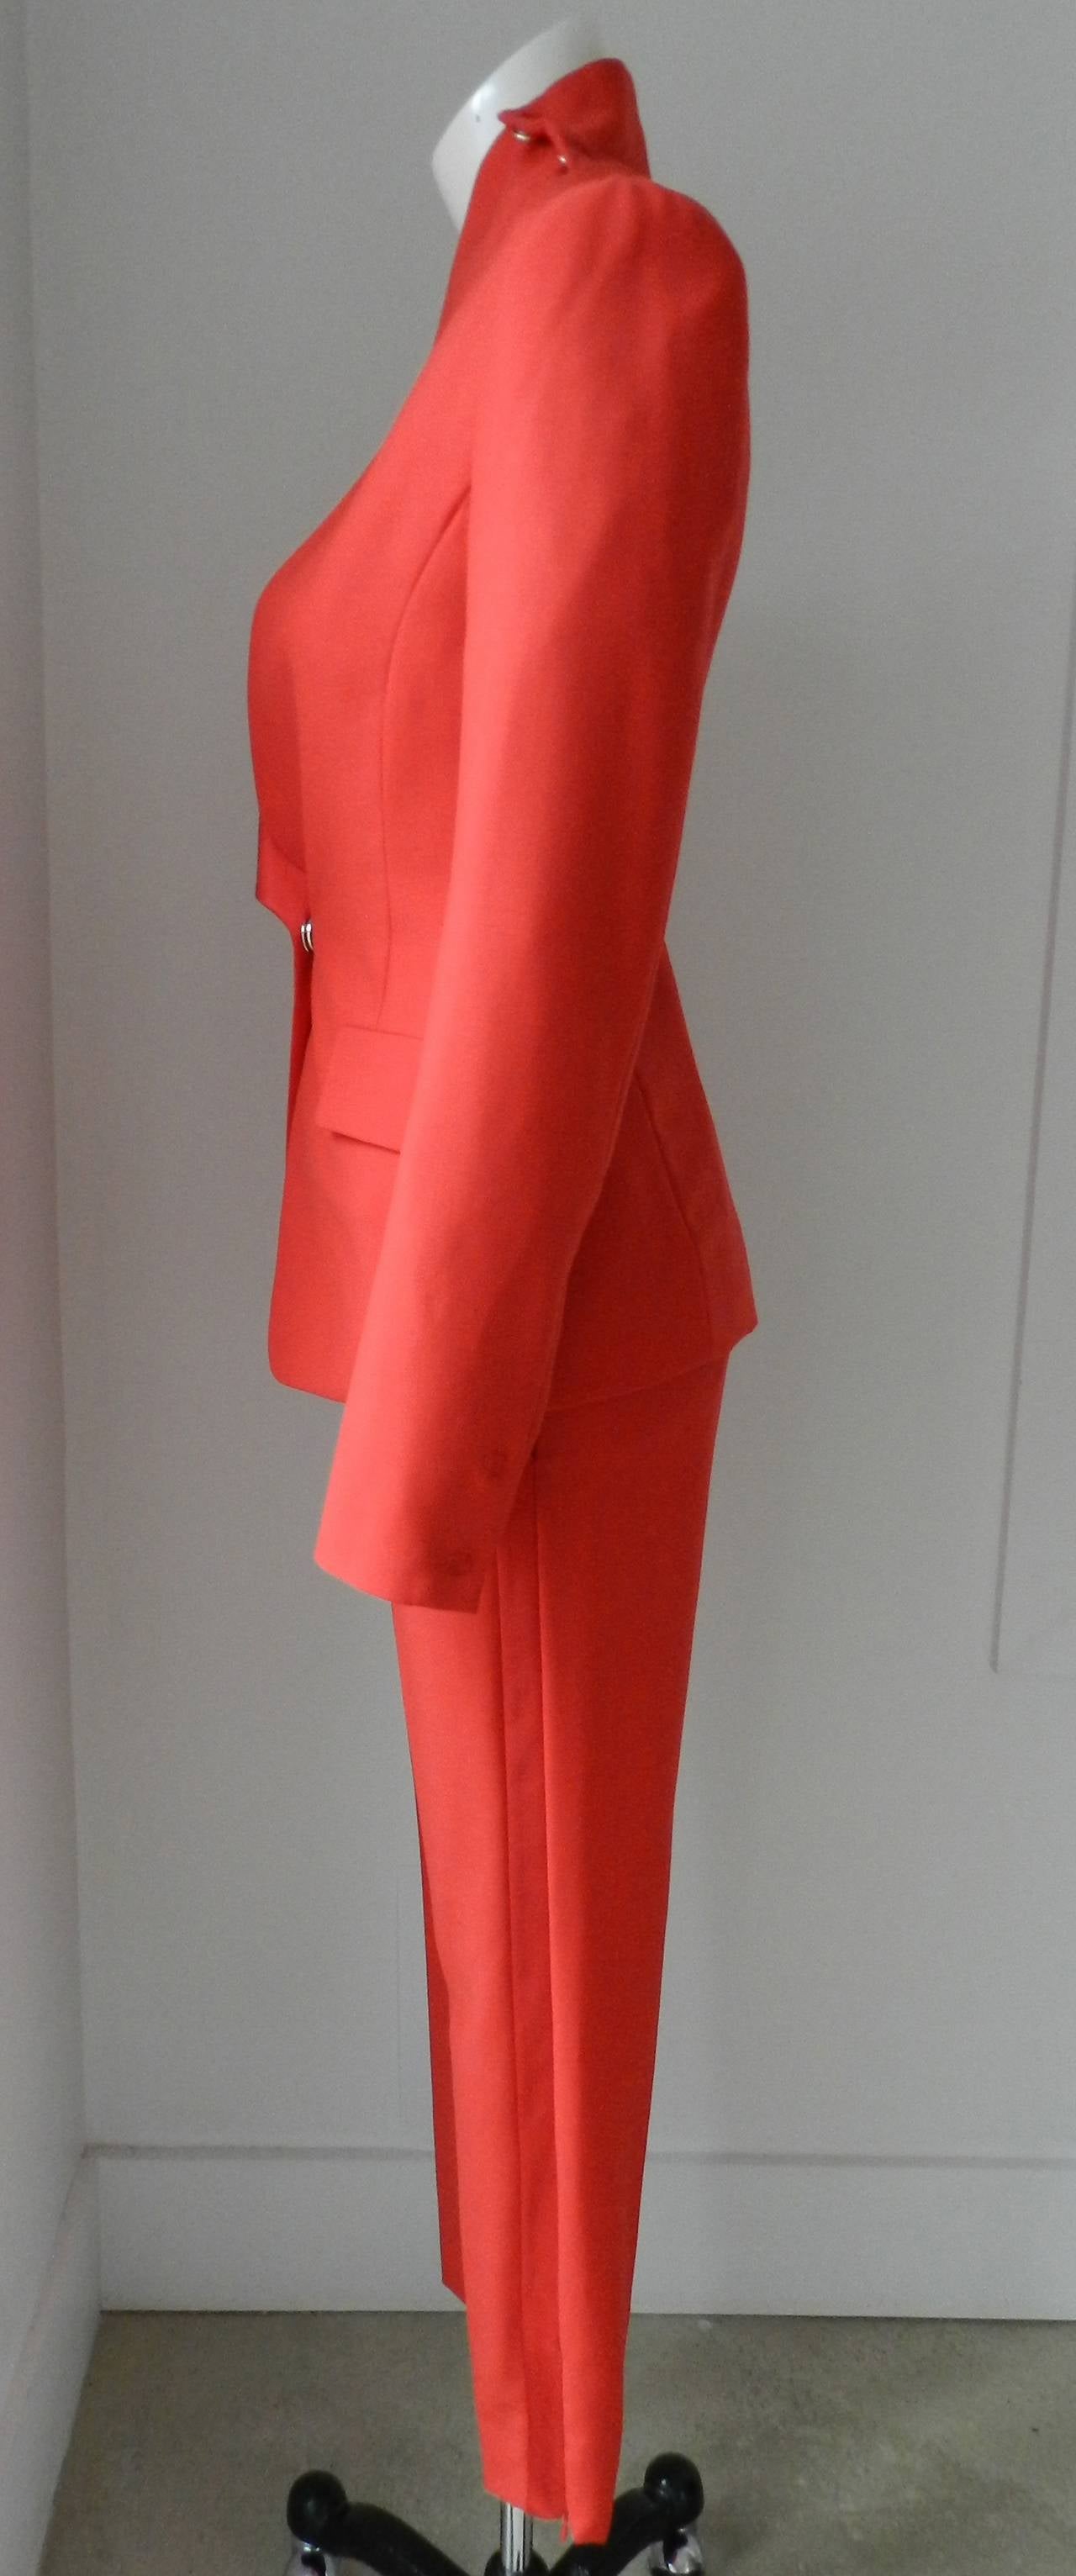 Maison Martin Margiela bright red wool and satin pant suit. 2014. Skinny and cropped low rise trouser pant with hidden ankle zipper. Jacket has a satin collar, and large snap details. Excellent condition - unworn new with tags. Tagged size IT 40